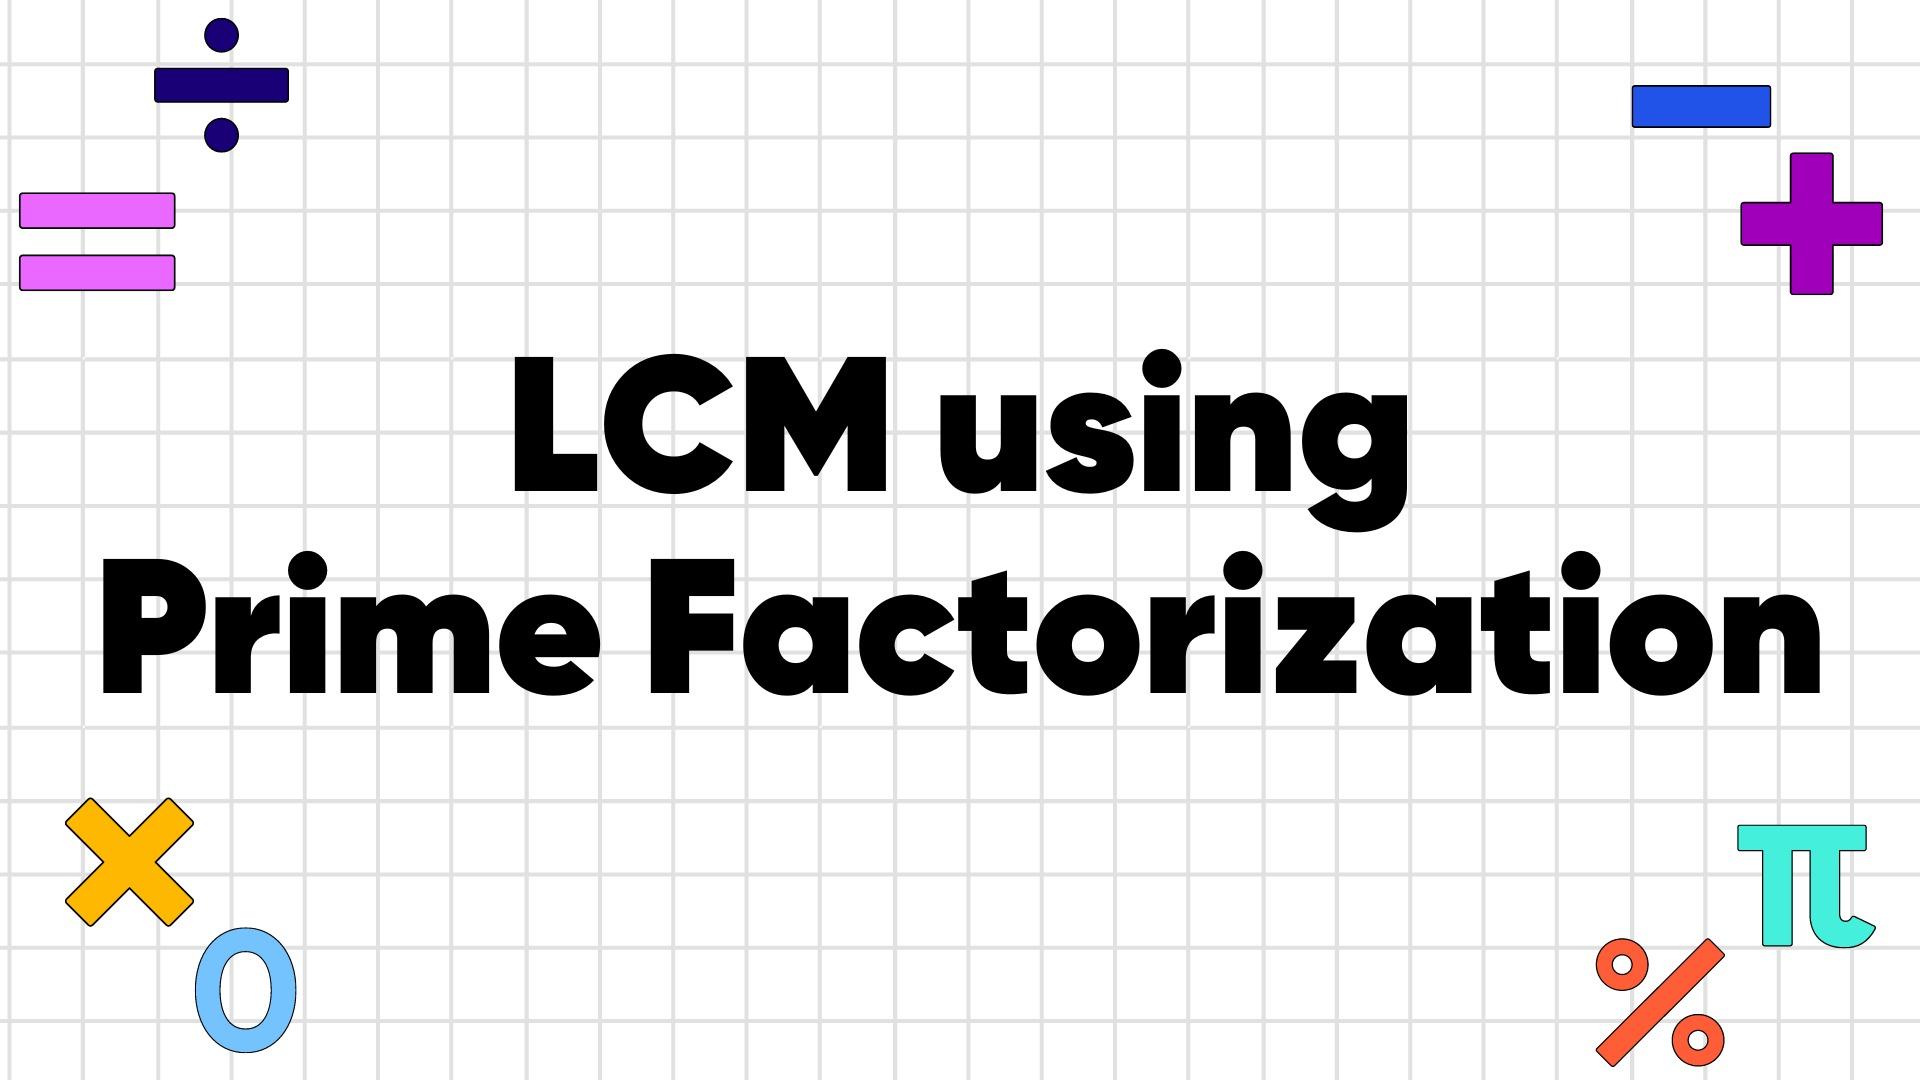 How to Find the LCM (Least Common Multiple) using Prime Factorization